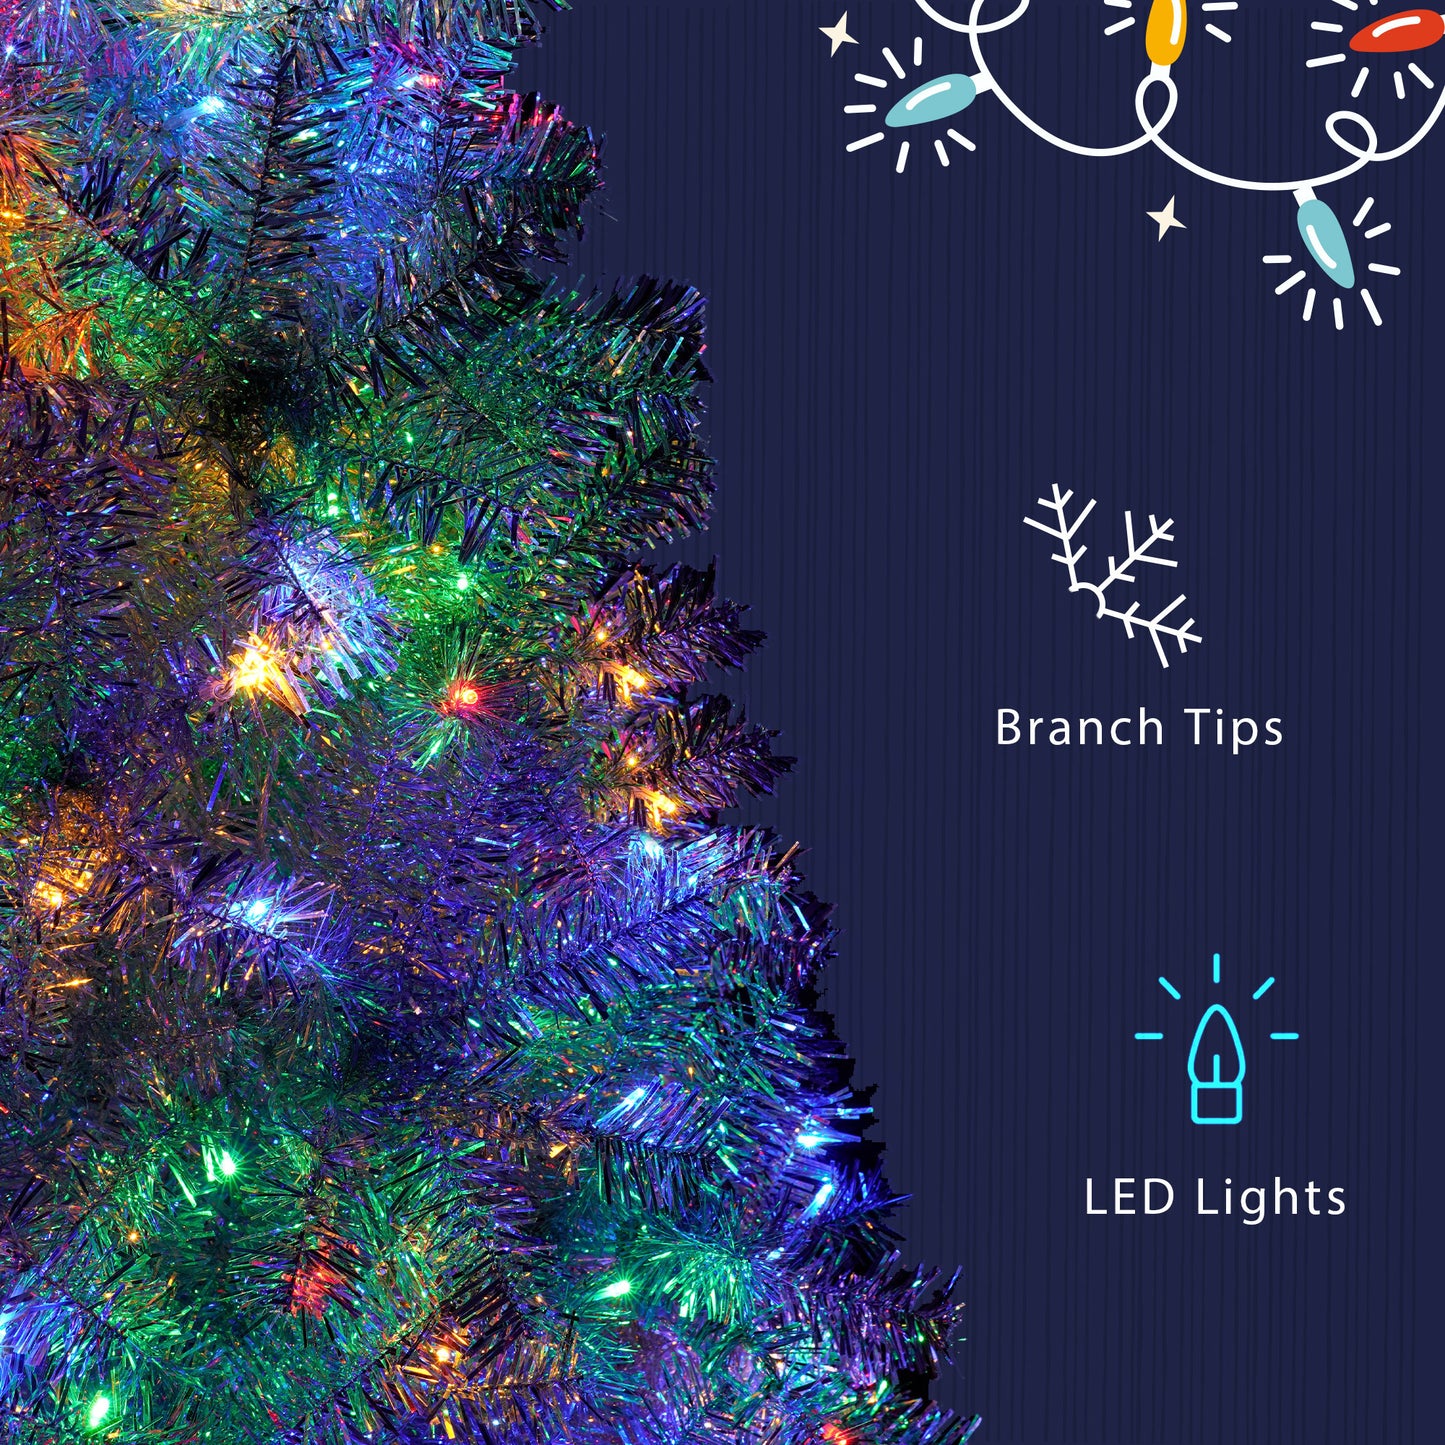 Gorgeous 6 FT Fir Bent Top Christmas Tree With Colorful LED Lights and Golden Star